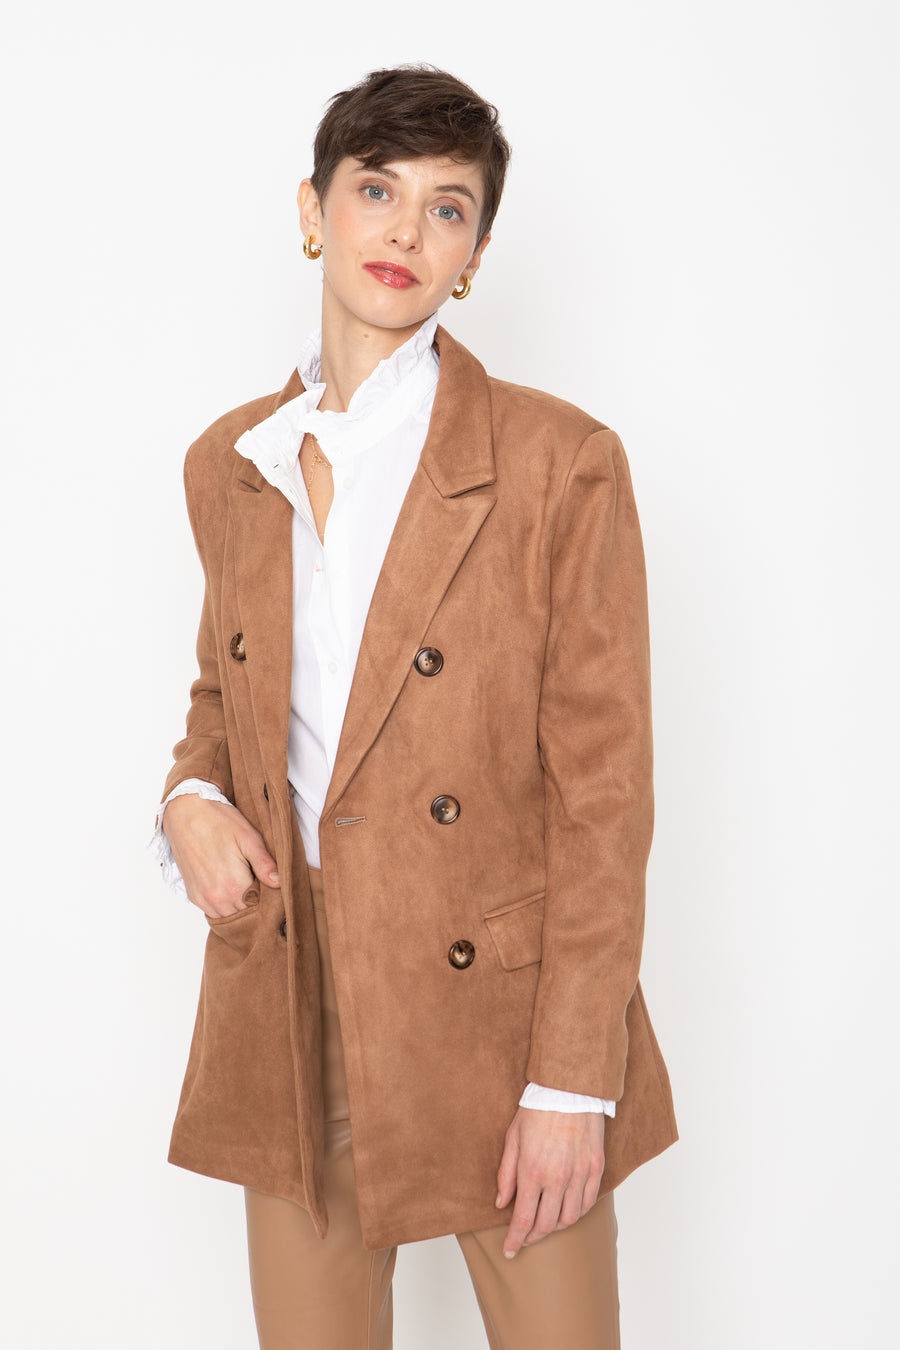 No Srcipt image - Images of 3 of 7 faux suede jacket, Emory vegan suede jacket, oversized jacket, double breasted, light brown color